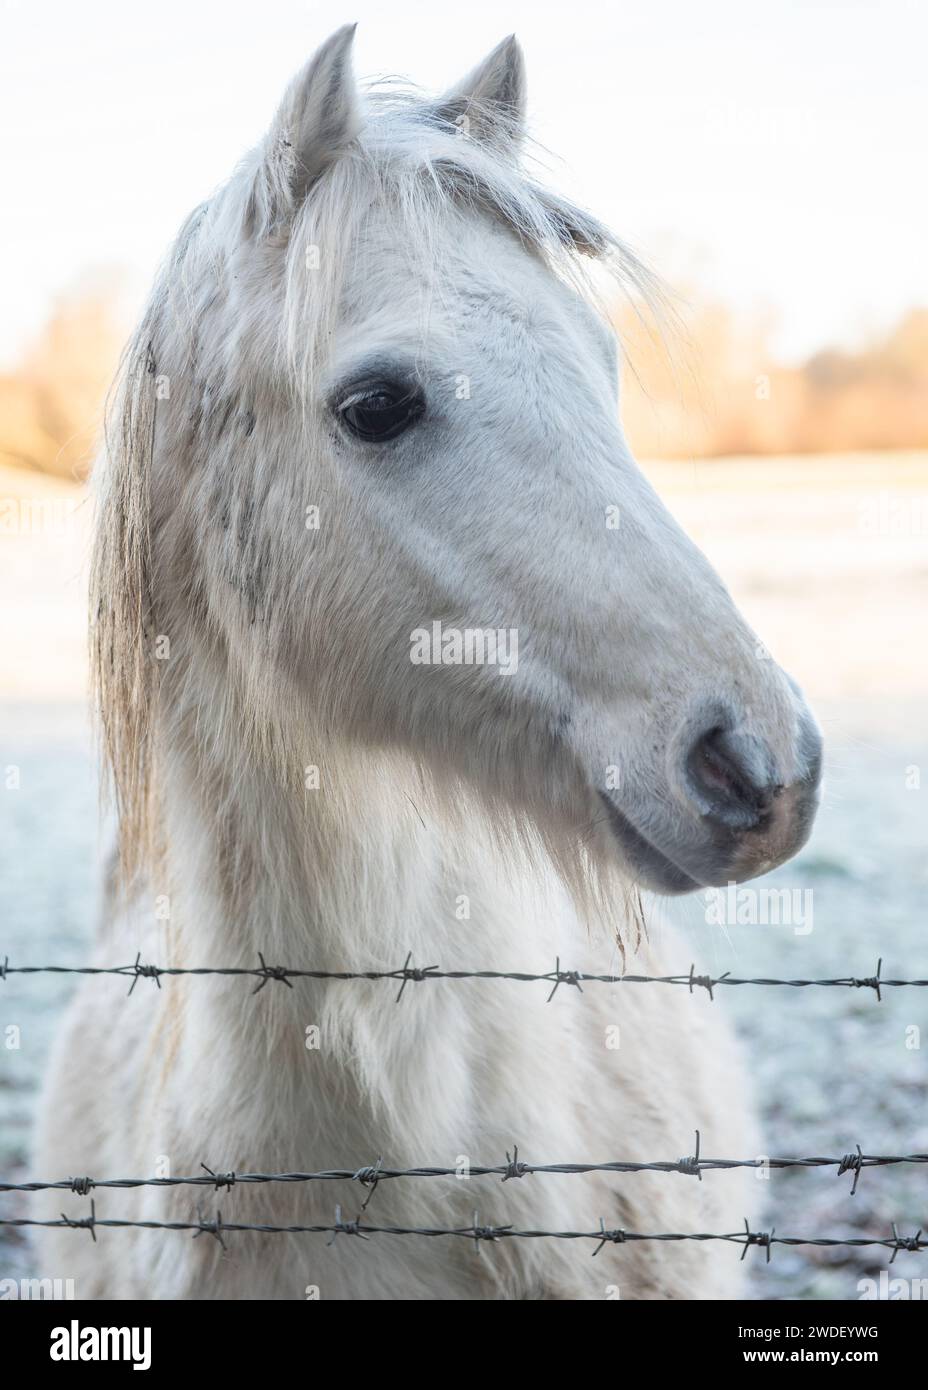 White Pony Close up of Face, behind Barbed Wire in England, UK Stock Photo